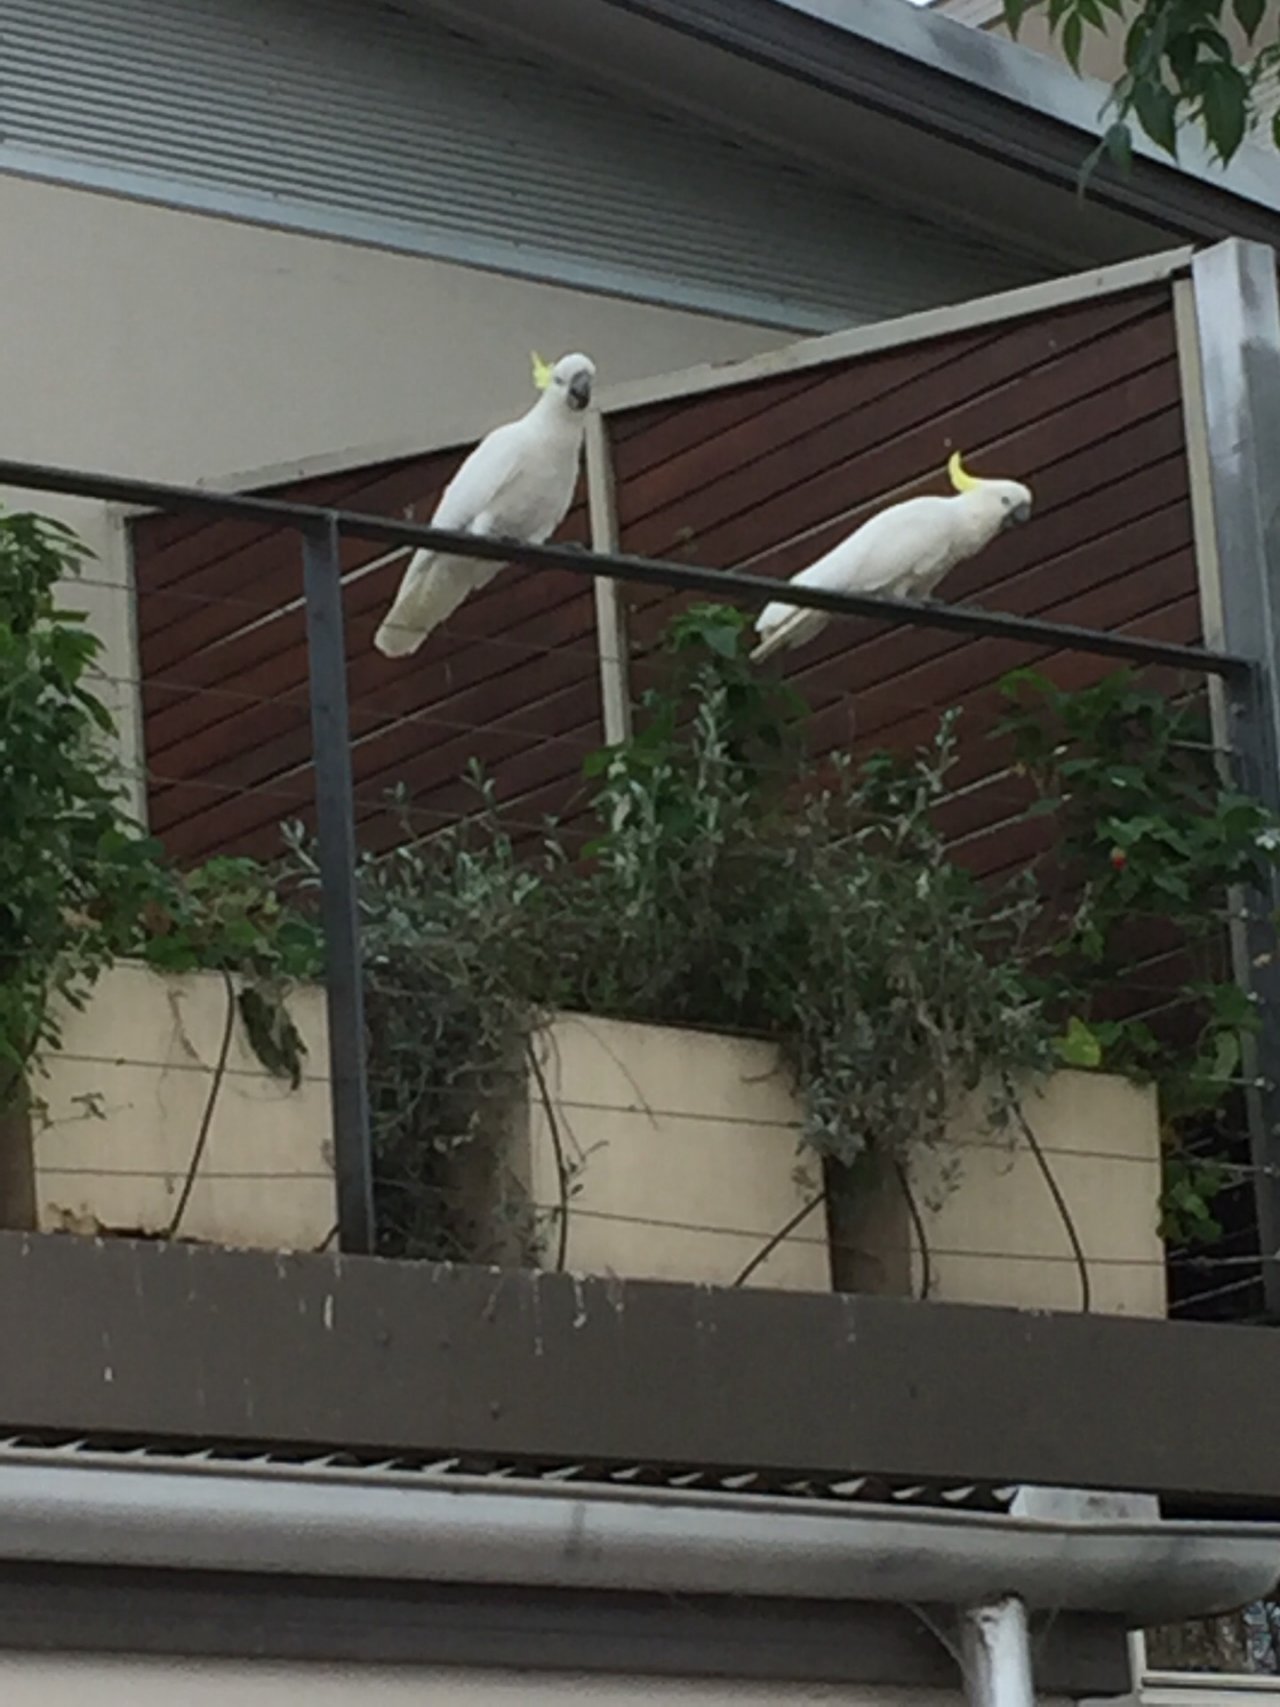 Sulphur-crested Cockatoo in Big City Birds App spotted by Kate Eatts on 13.12.2020